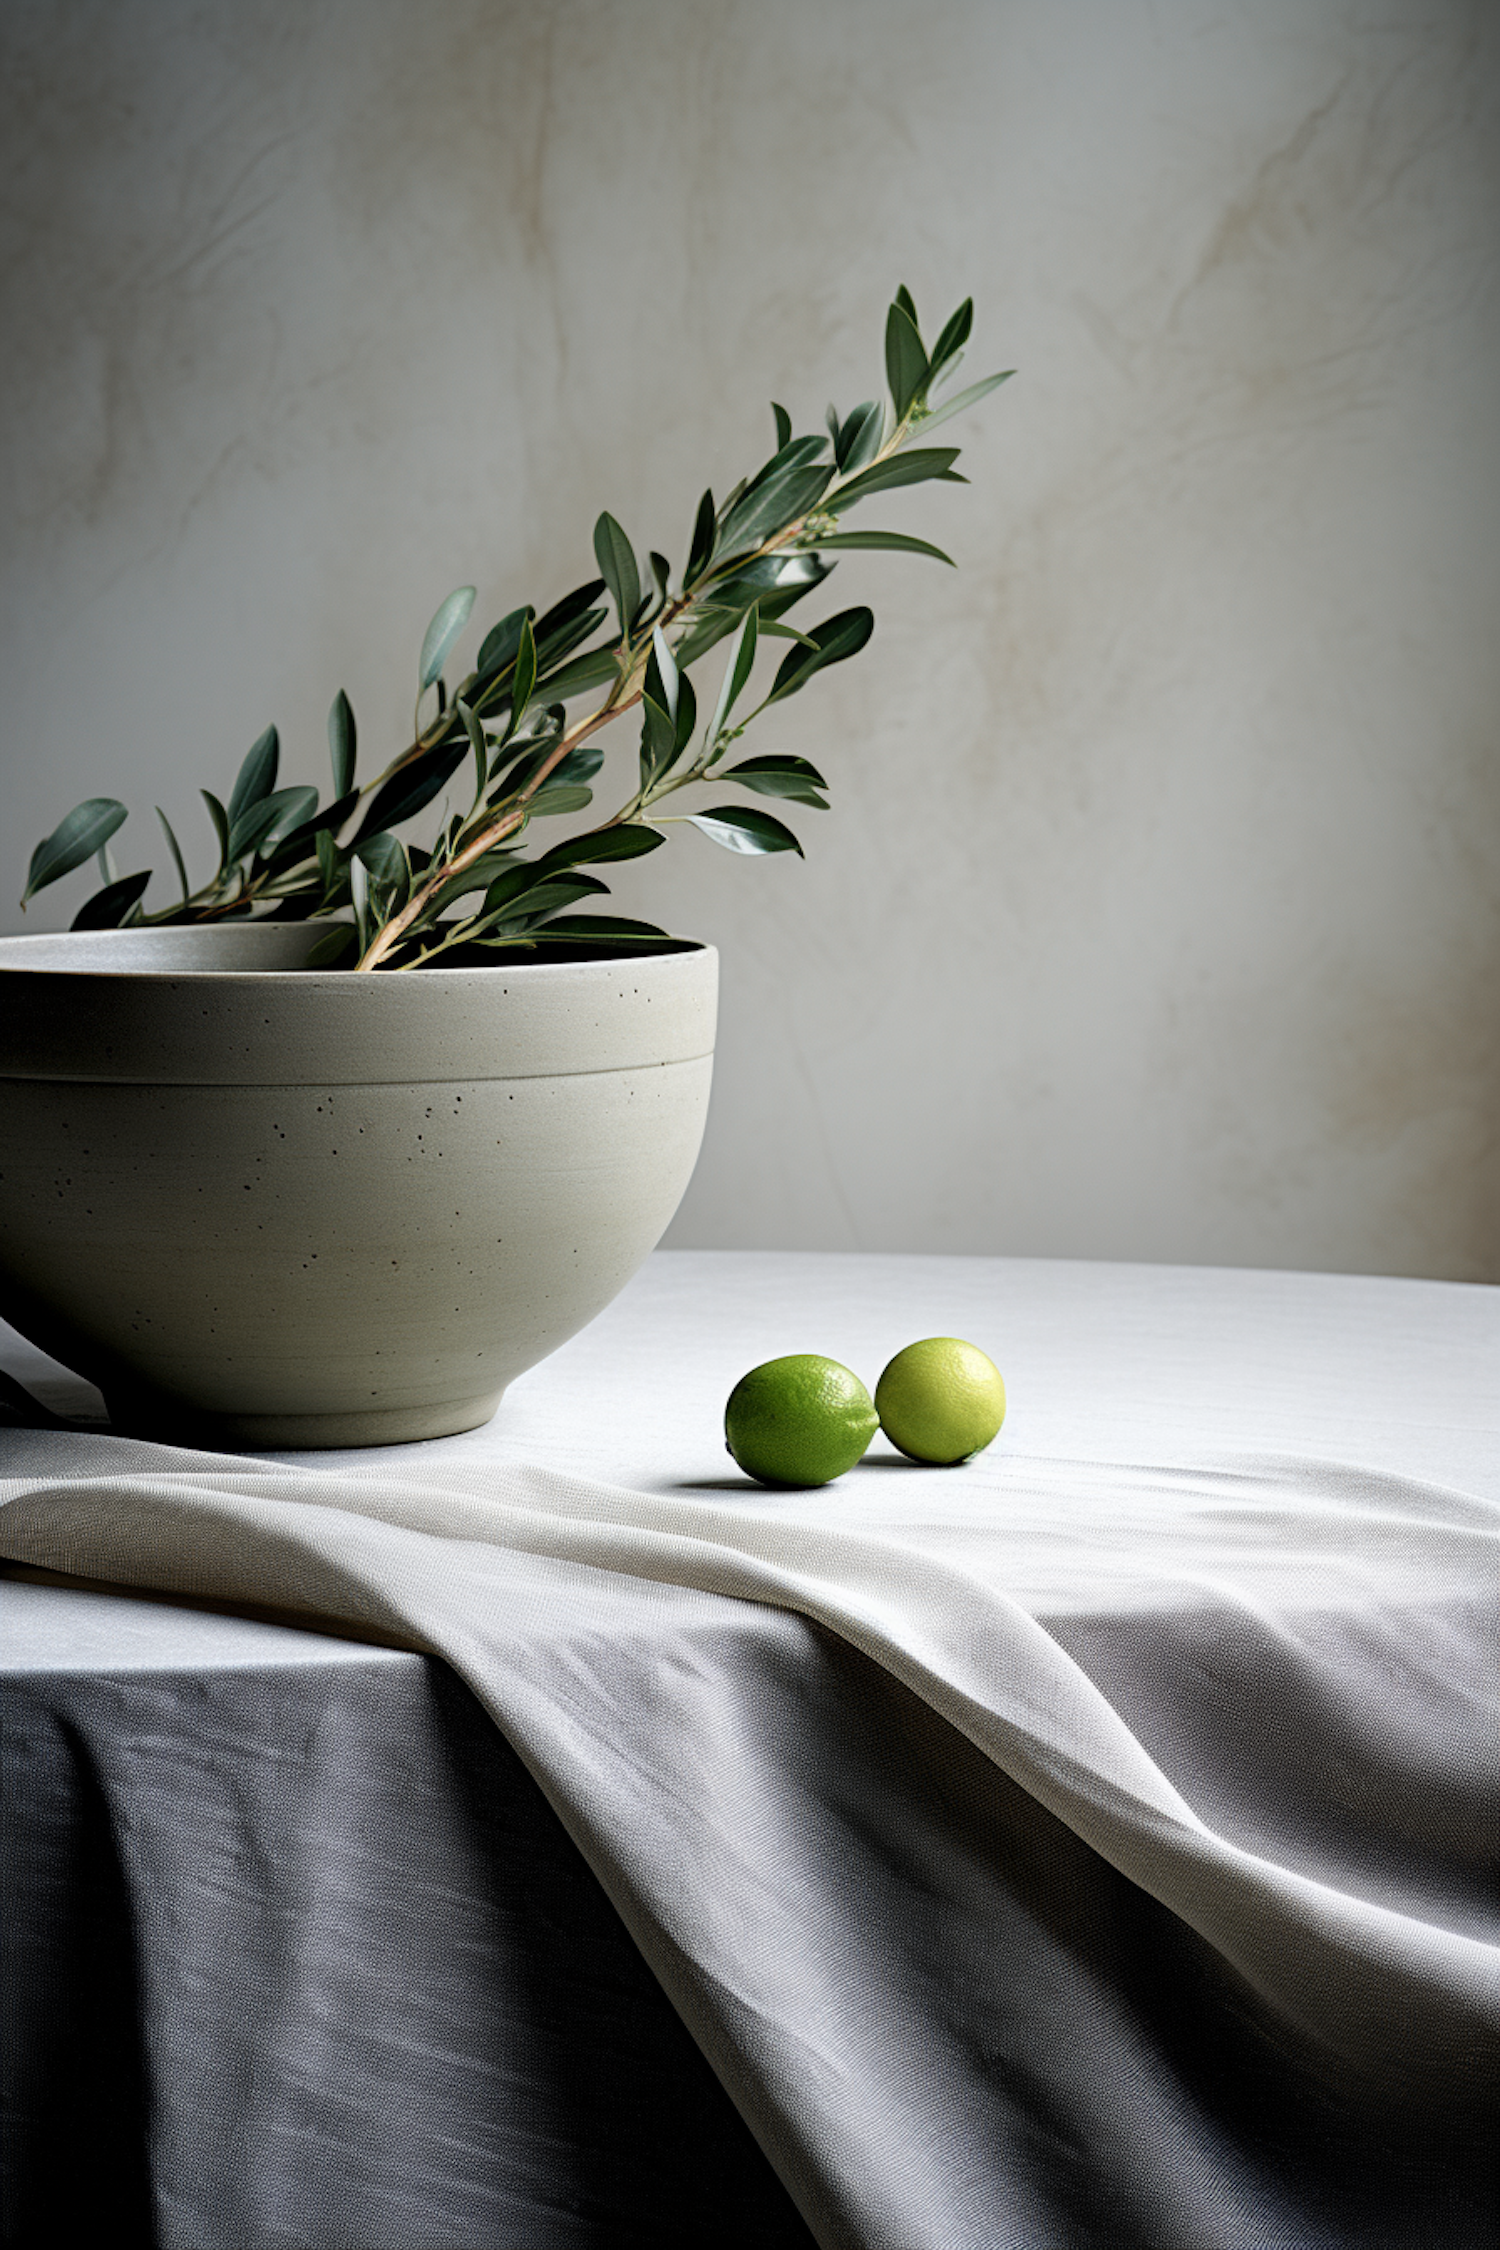 Tranquil Still Life with Ceramic Bowl and Limes